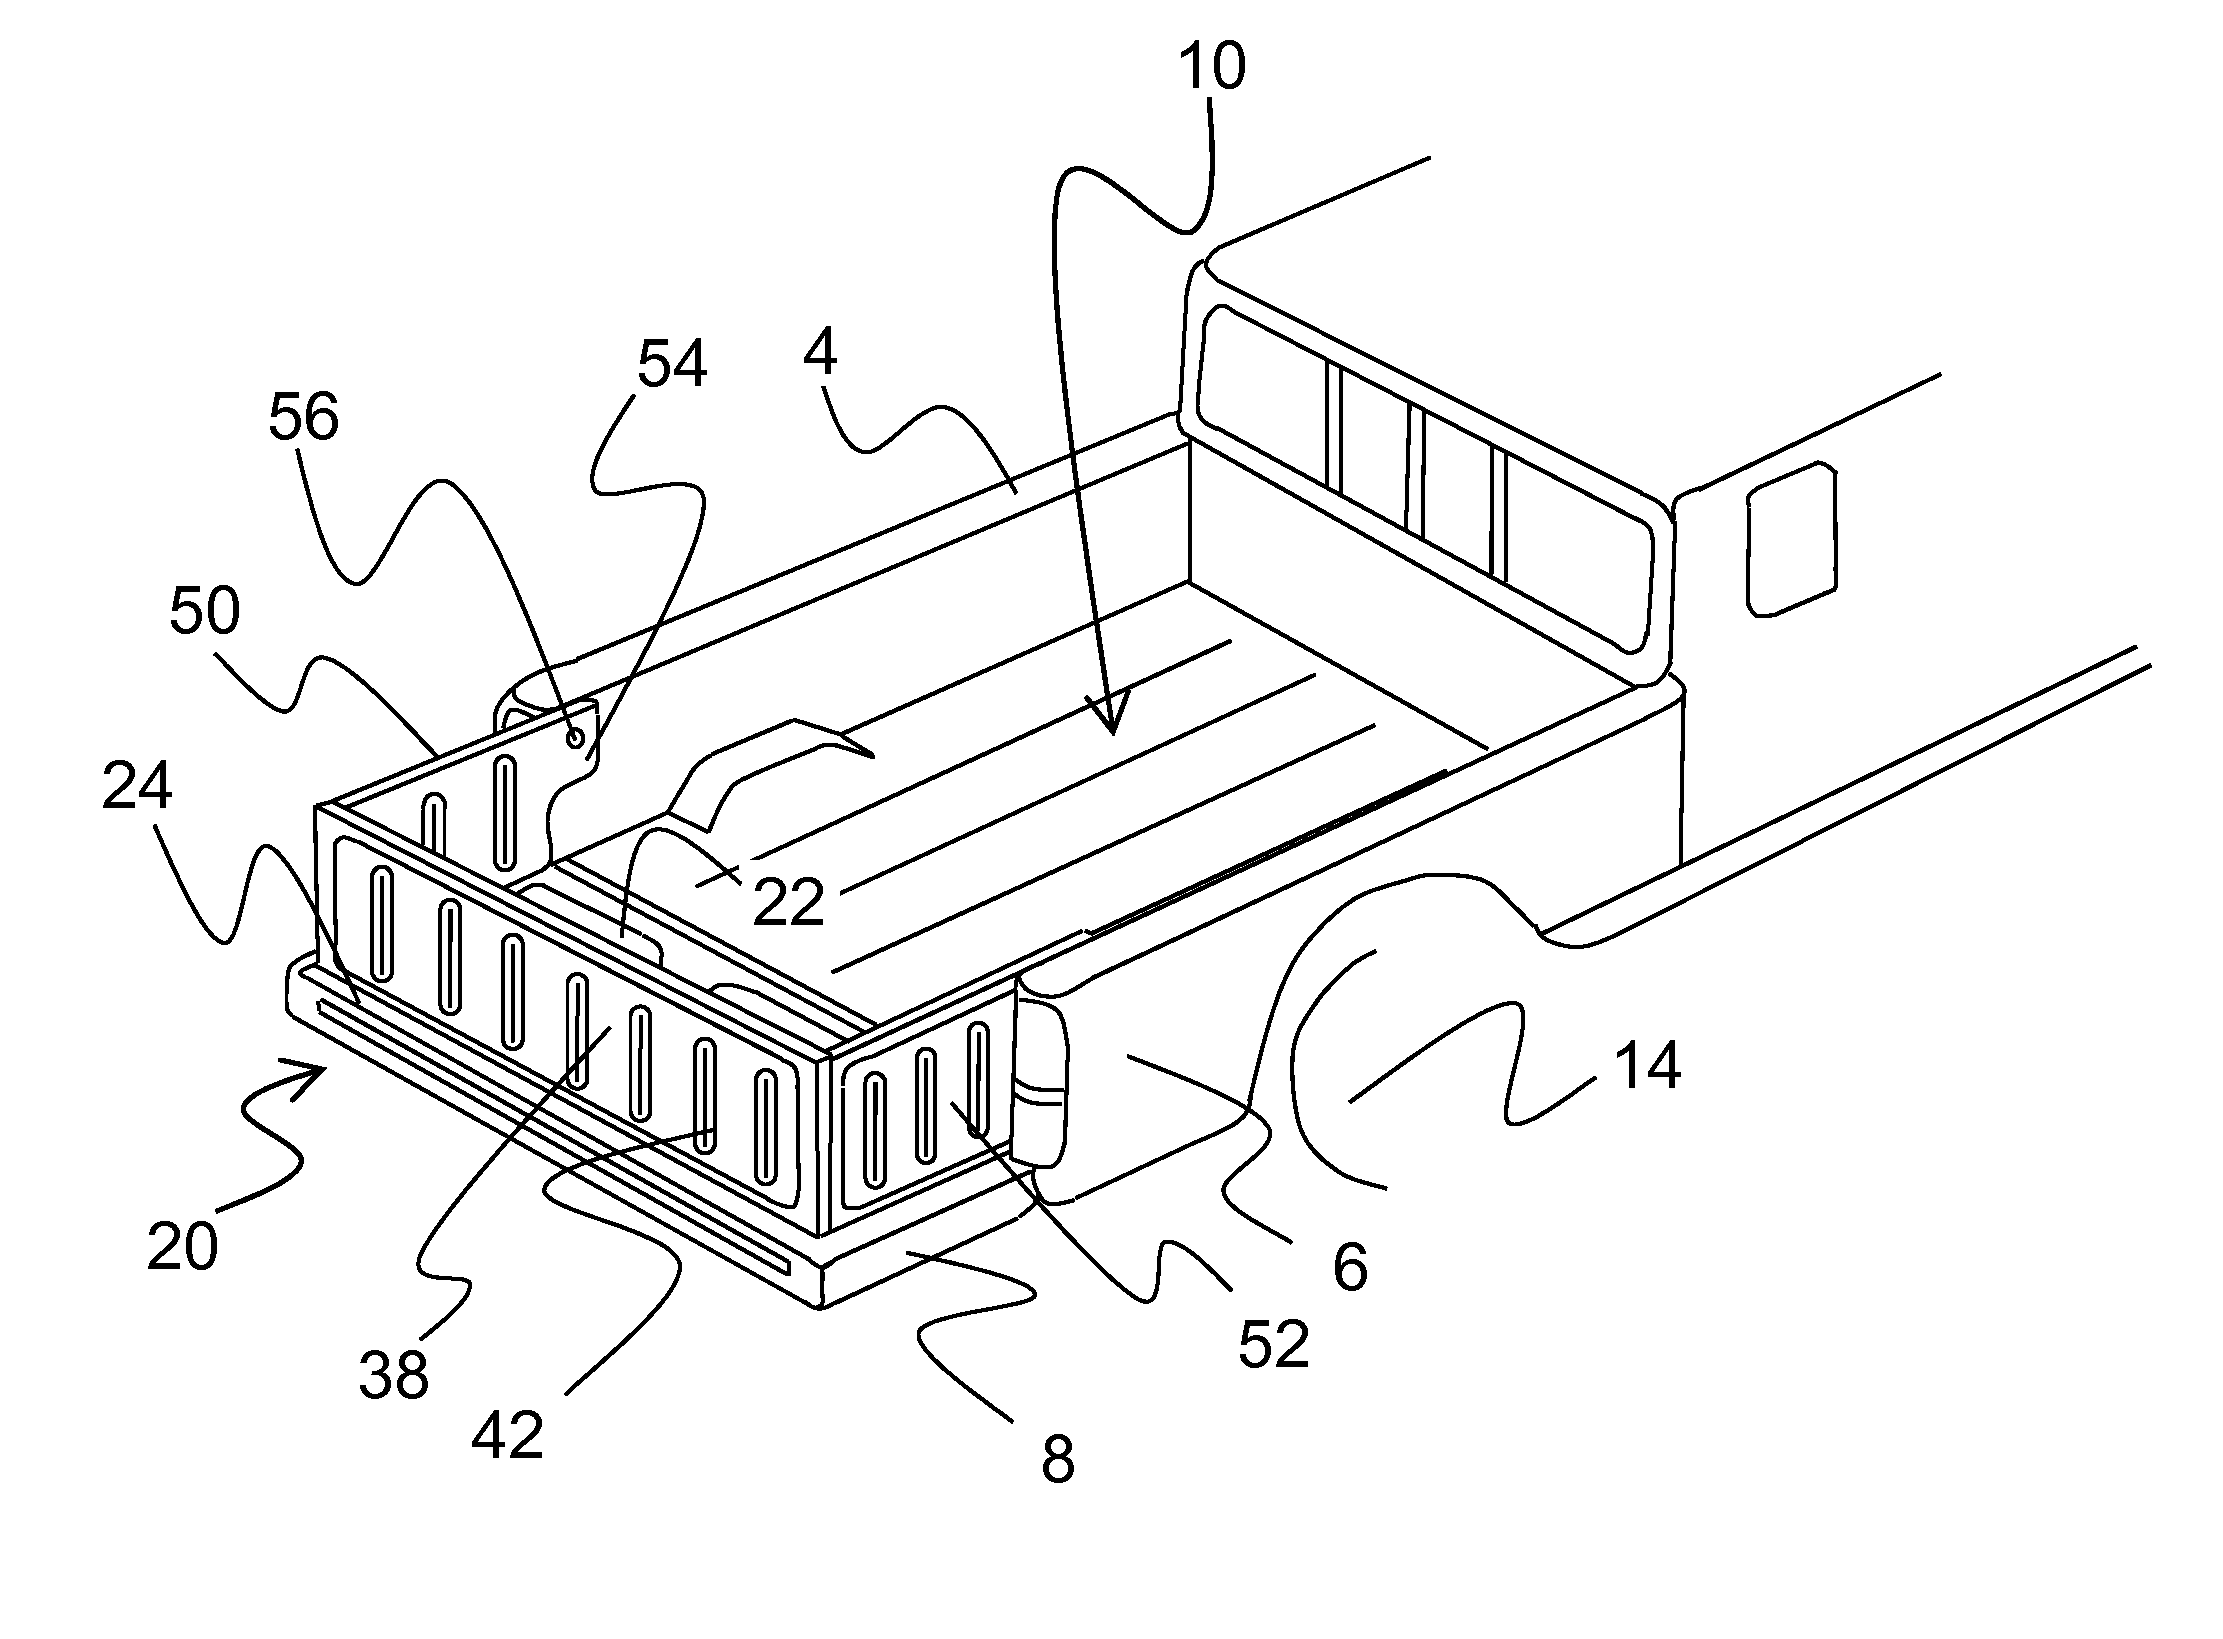 Cargo area extension system method and apparatus